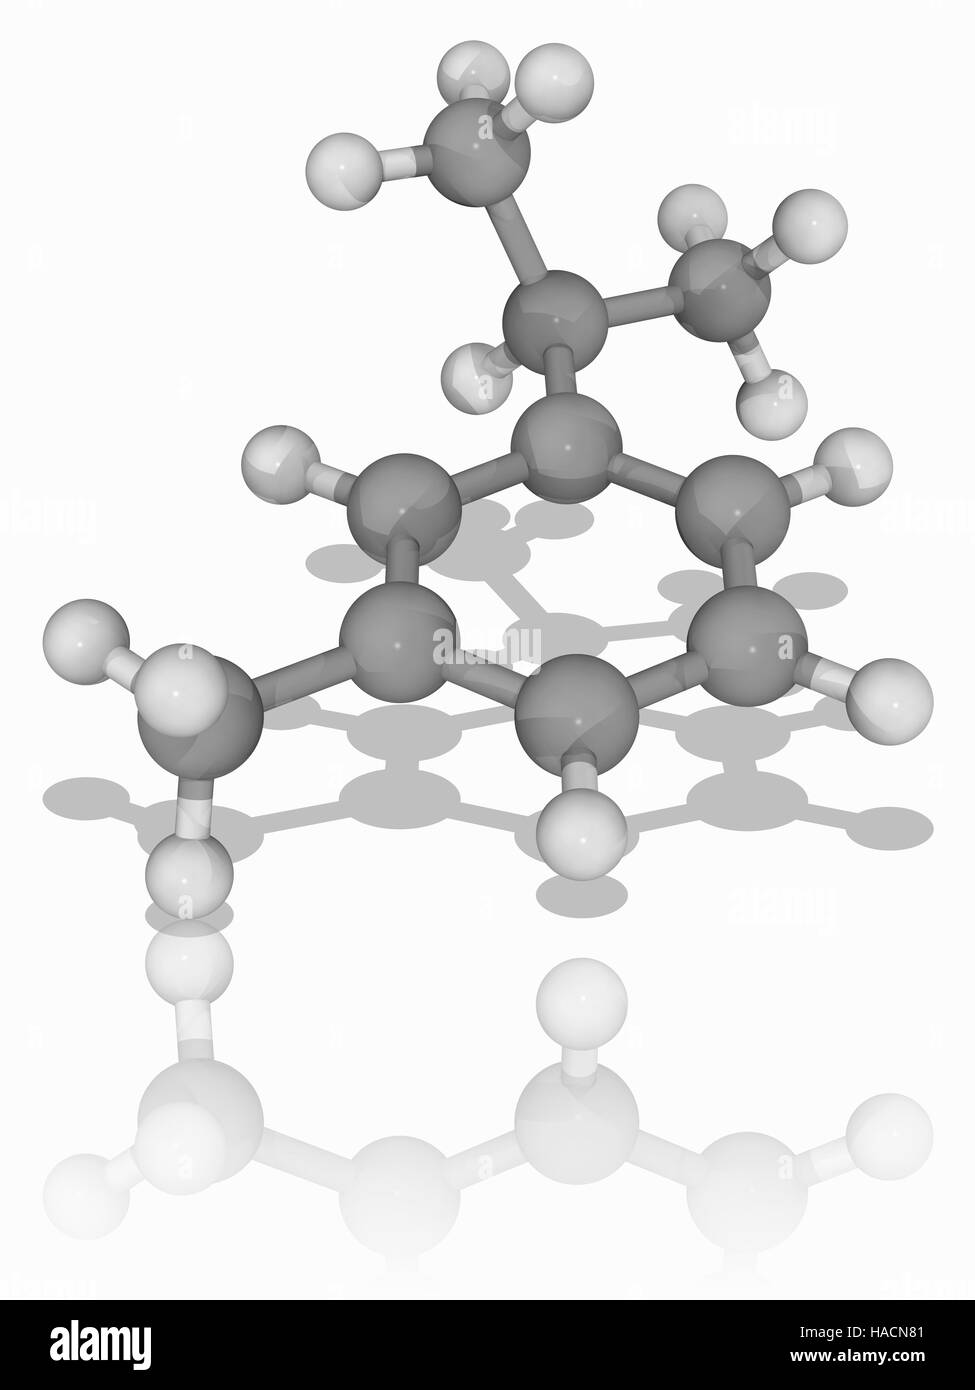 Cymene. Molecular model of the aromatic organic compound cymene (C10.H14), a constituent of many essential oils. Atoms are represented as spheres and are colour-coded: carbon (grey) and hydrogen (white). Illustration. Stock Photo